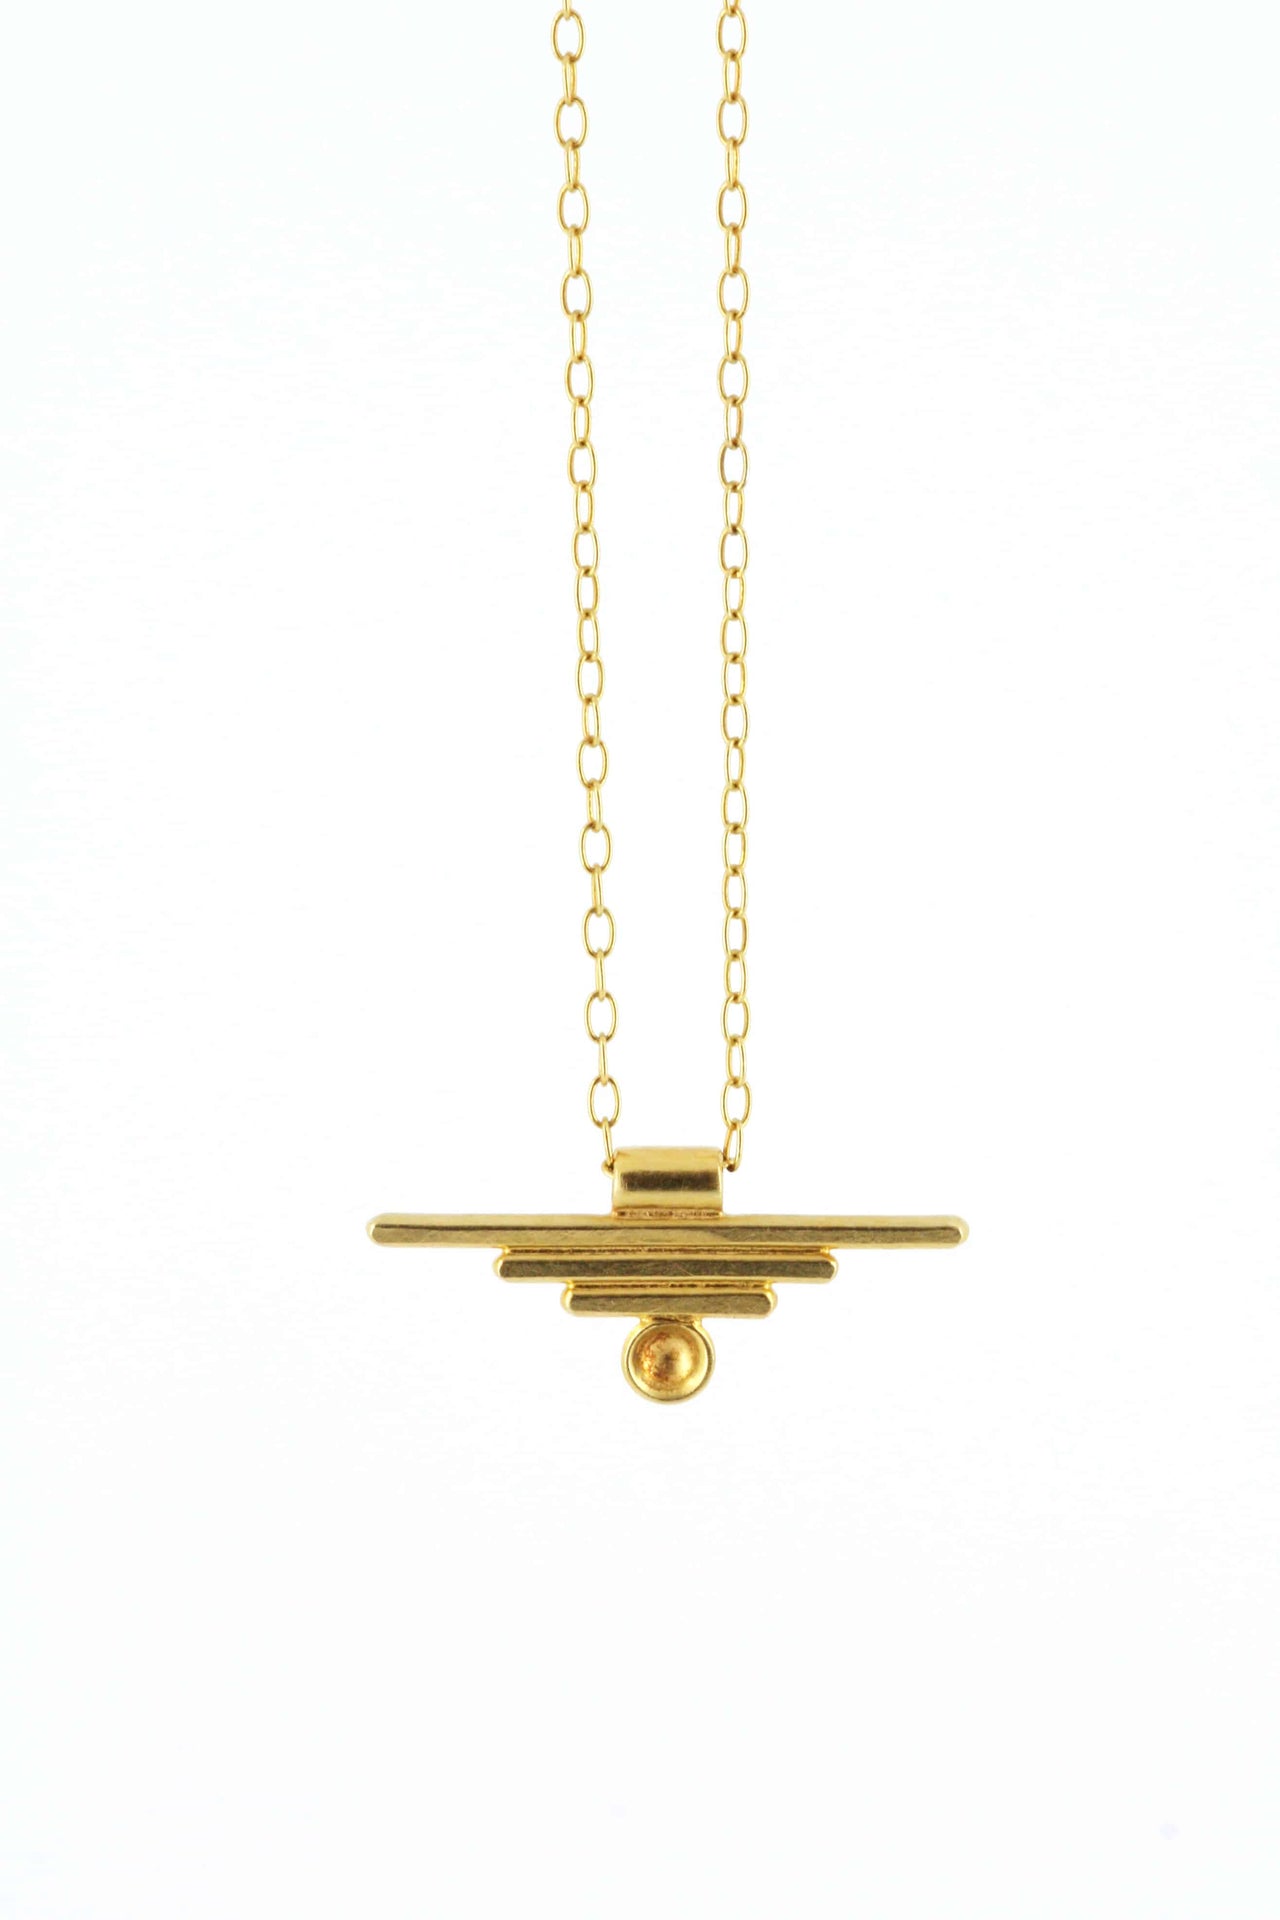 Tulum Necklace - Gold Plated